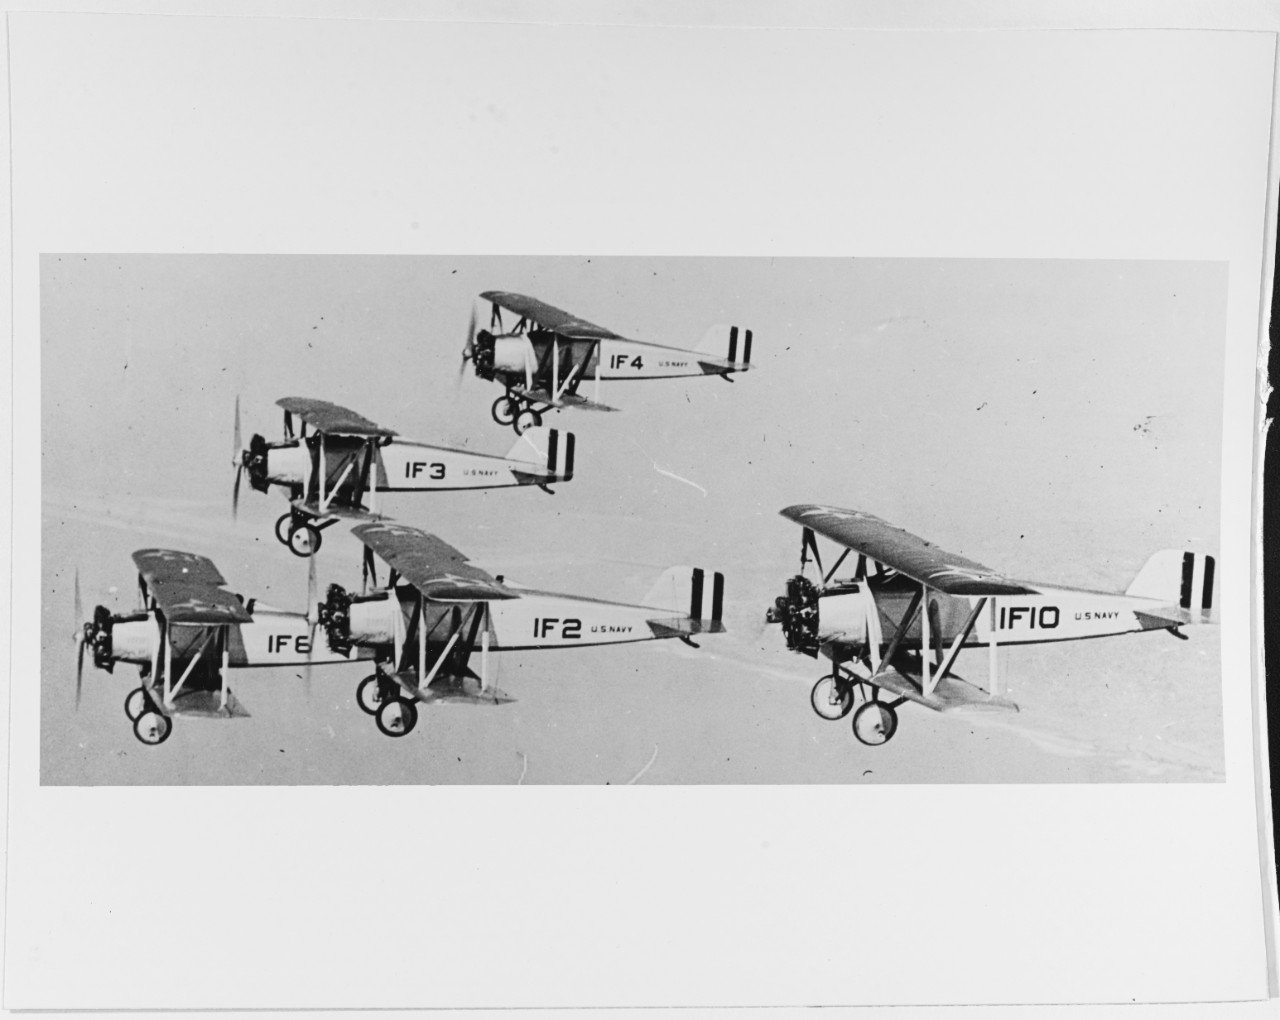 Naval aircraft factory TS-1 type.